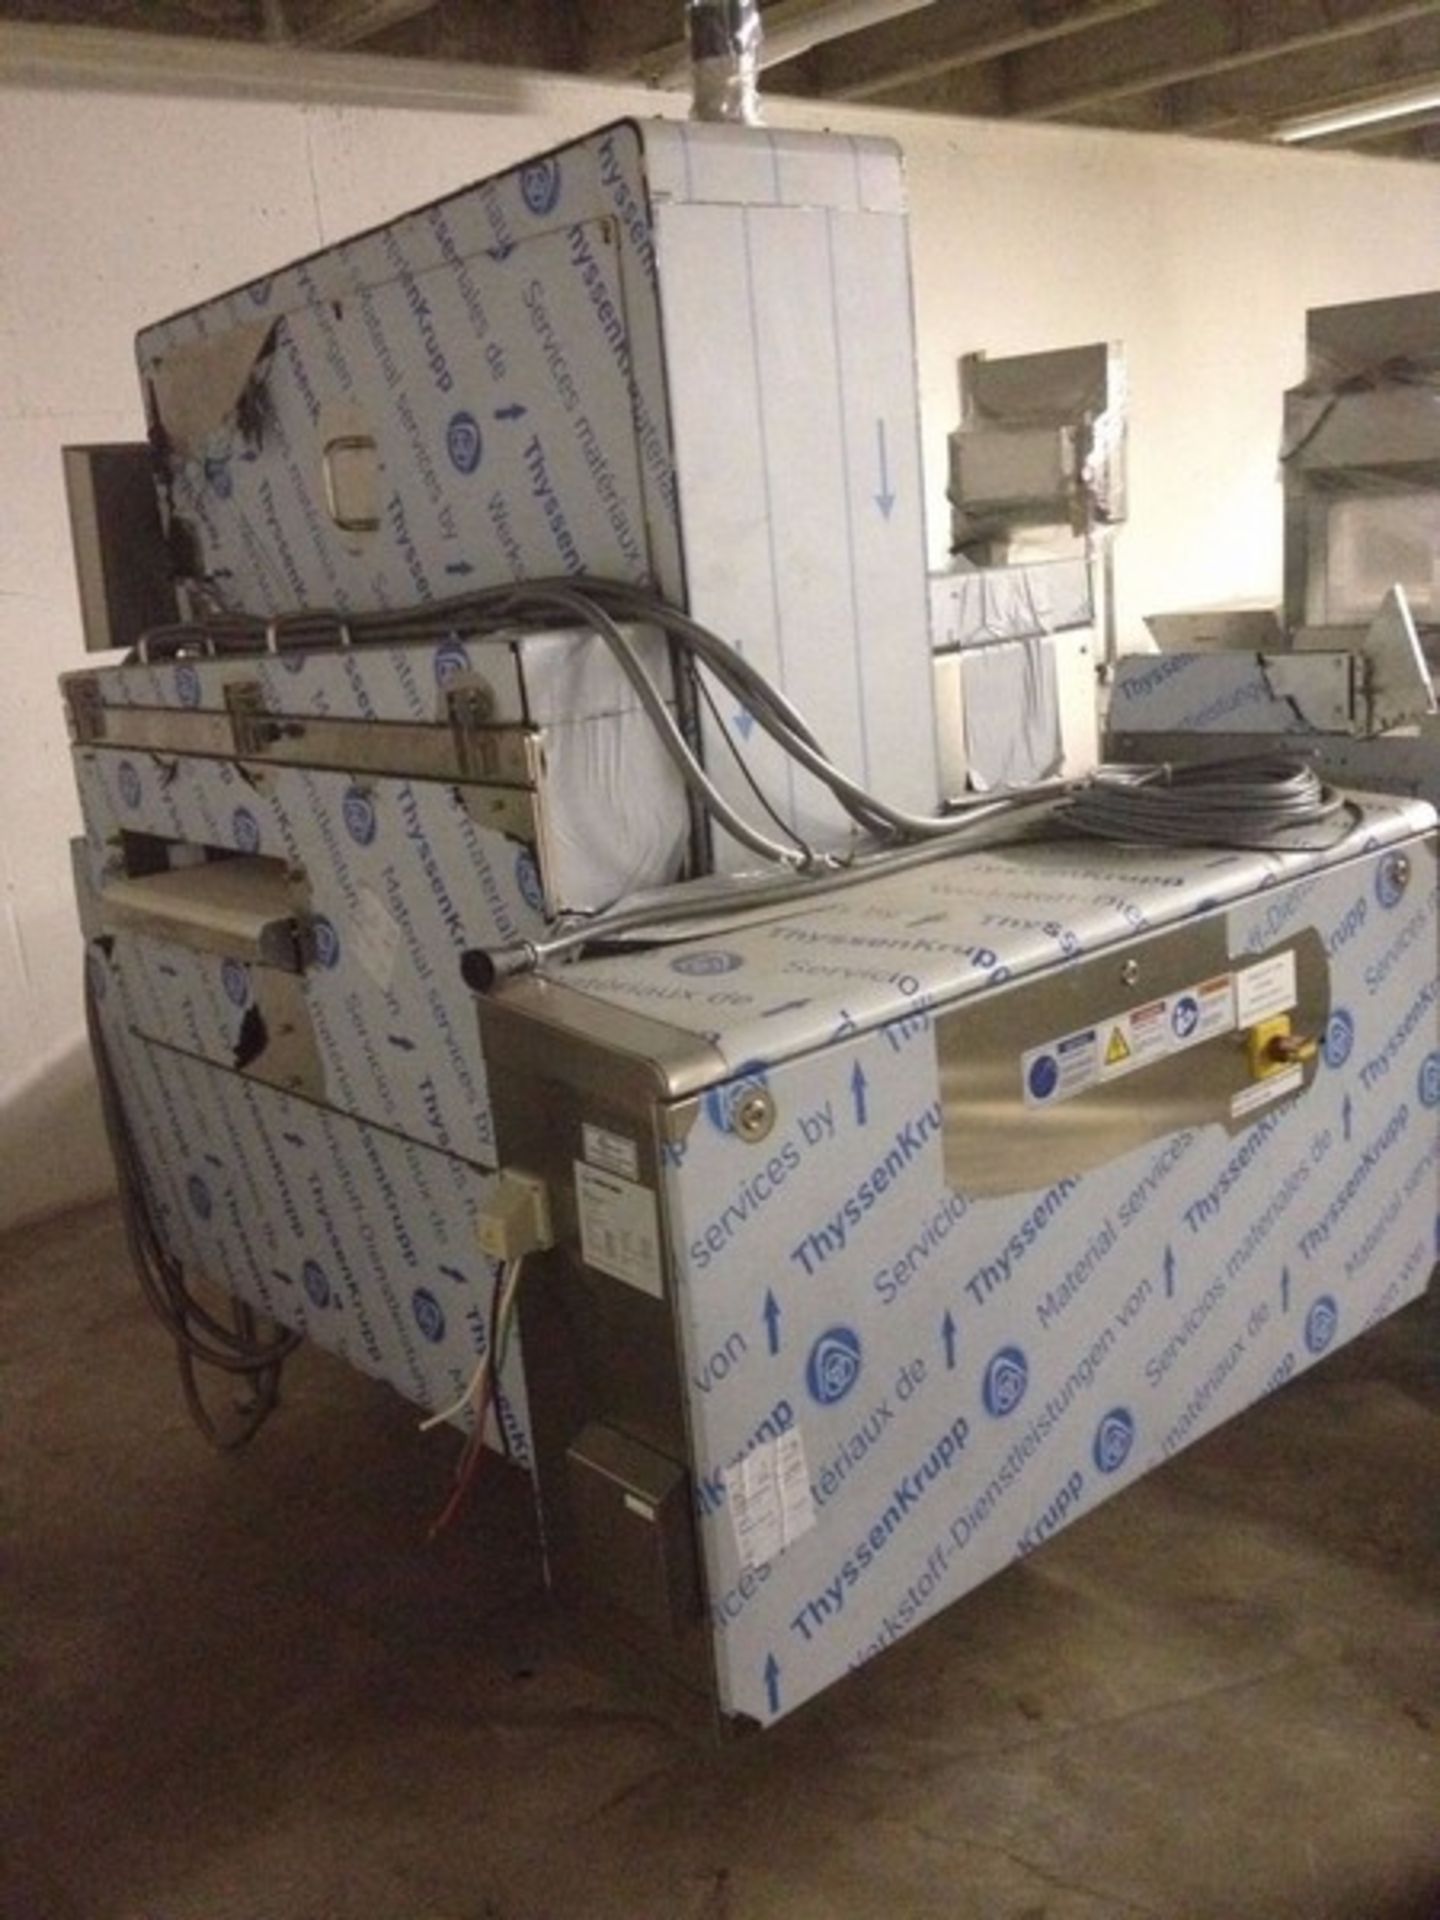 NEW 2012 MultiVac Vacuum Packager, Type: H050, S/N 158612, 208/120 Volts (LOCATED IN BELTSVILLE, MD) - Bild 14 aus 14